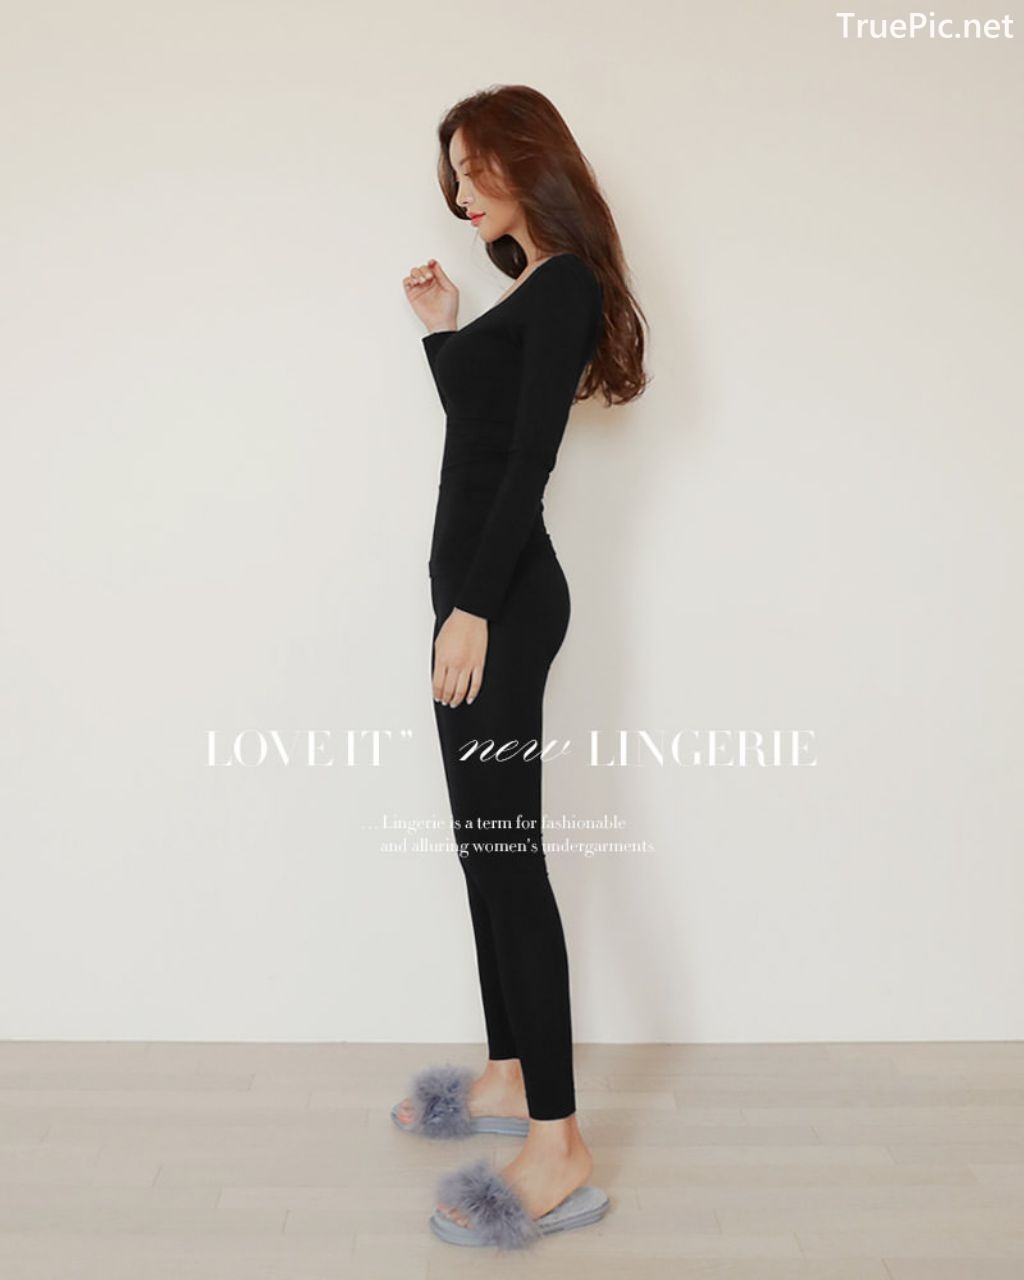 Image-Korean-Fashion-Model-Jin-Hee-Black-Tights-And-Winter-Sweater-Dress-TruePic.net- Picture-6